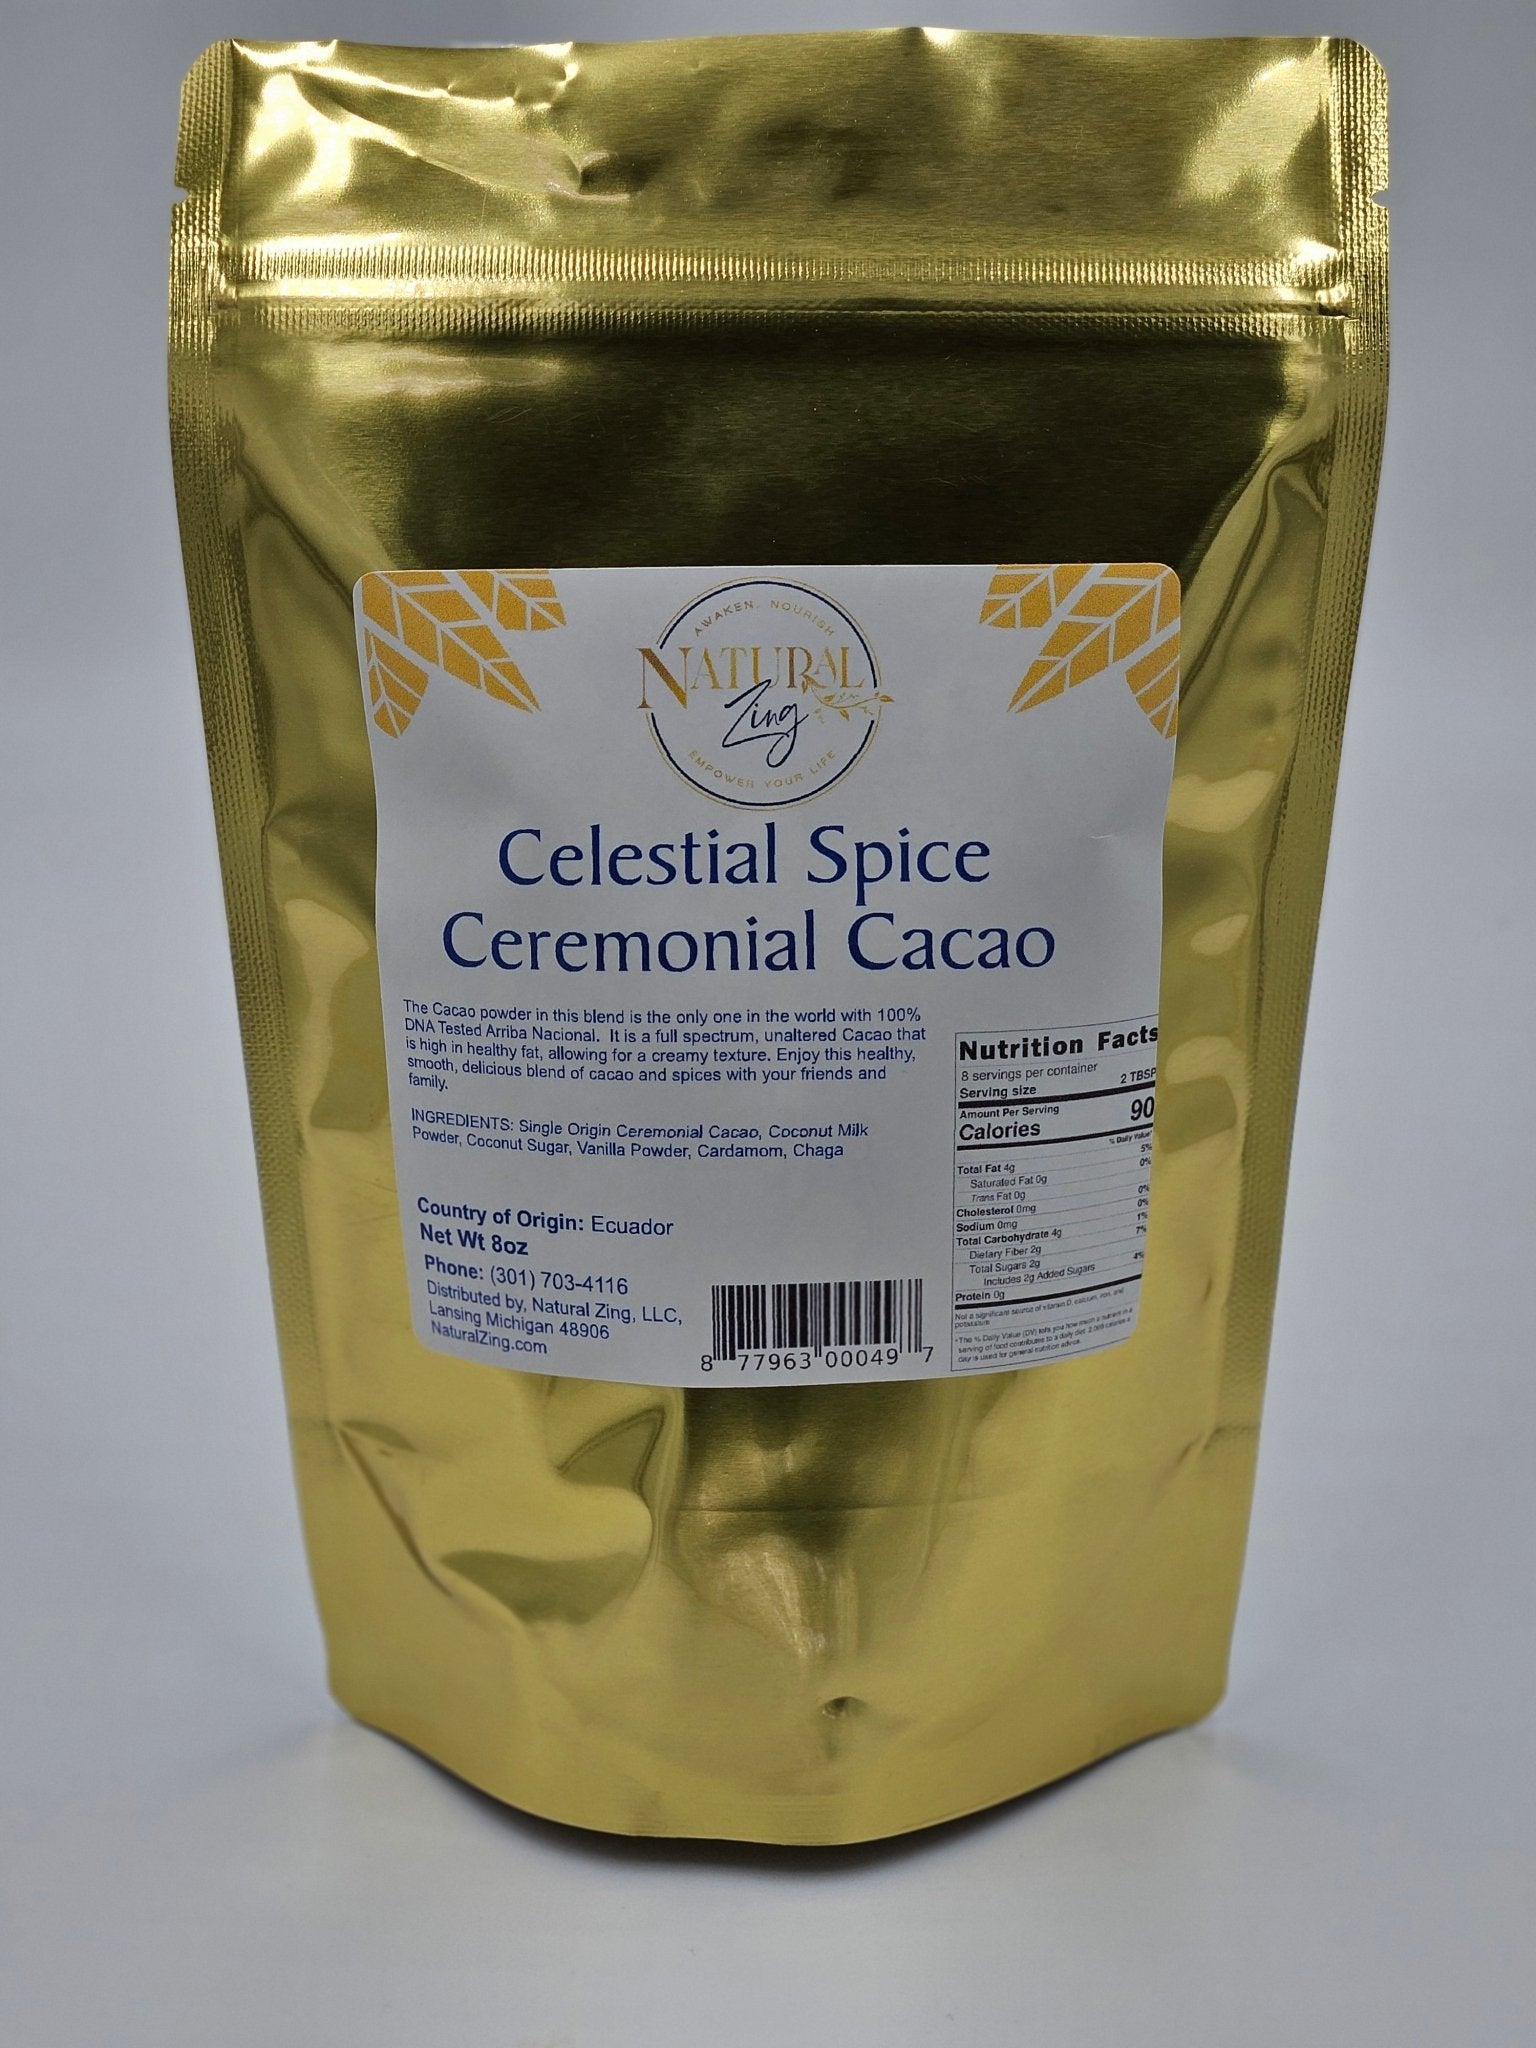 Ceremonial Cacao Celestial Spice (Hot Chocolate Mix) - Natural Zing